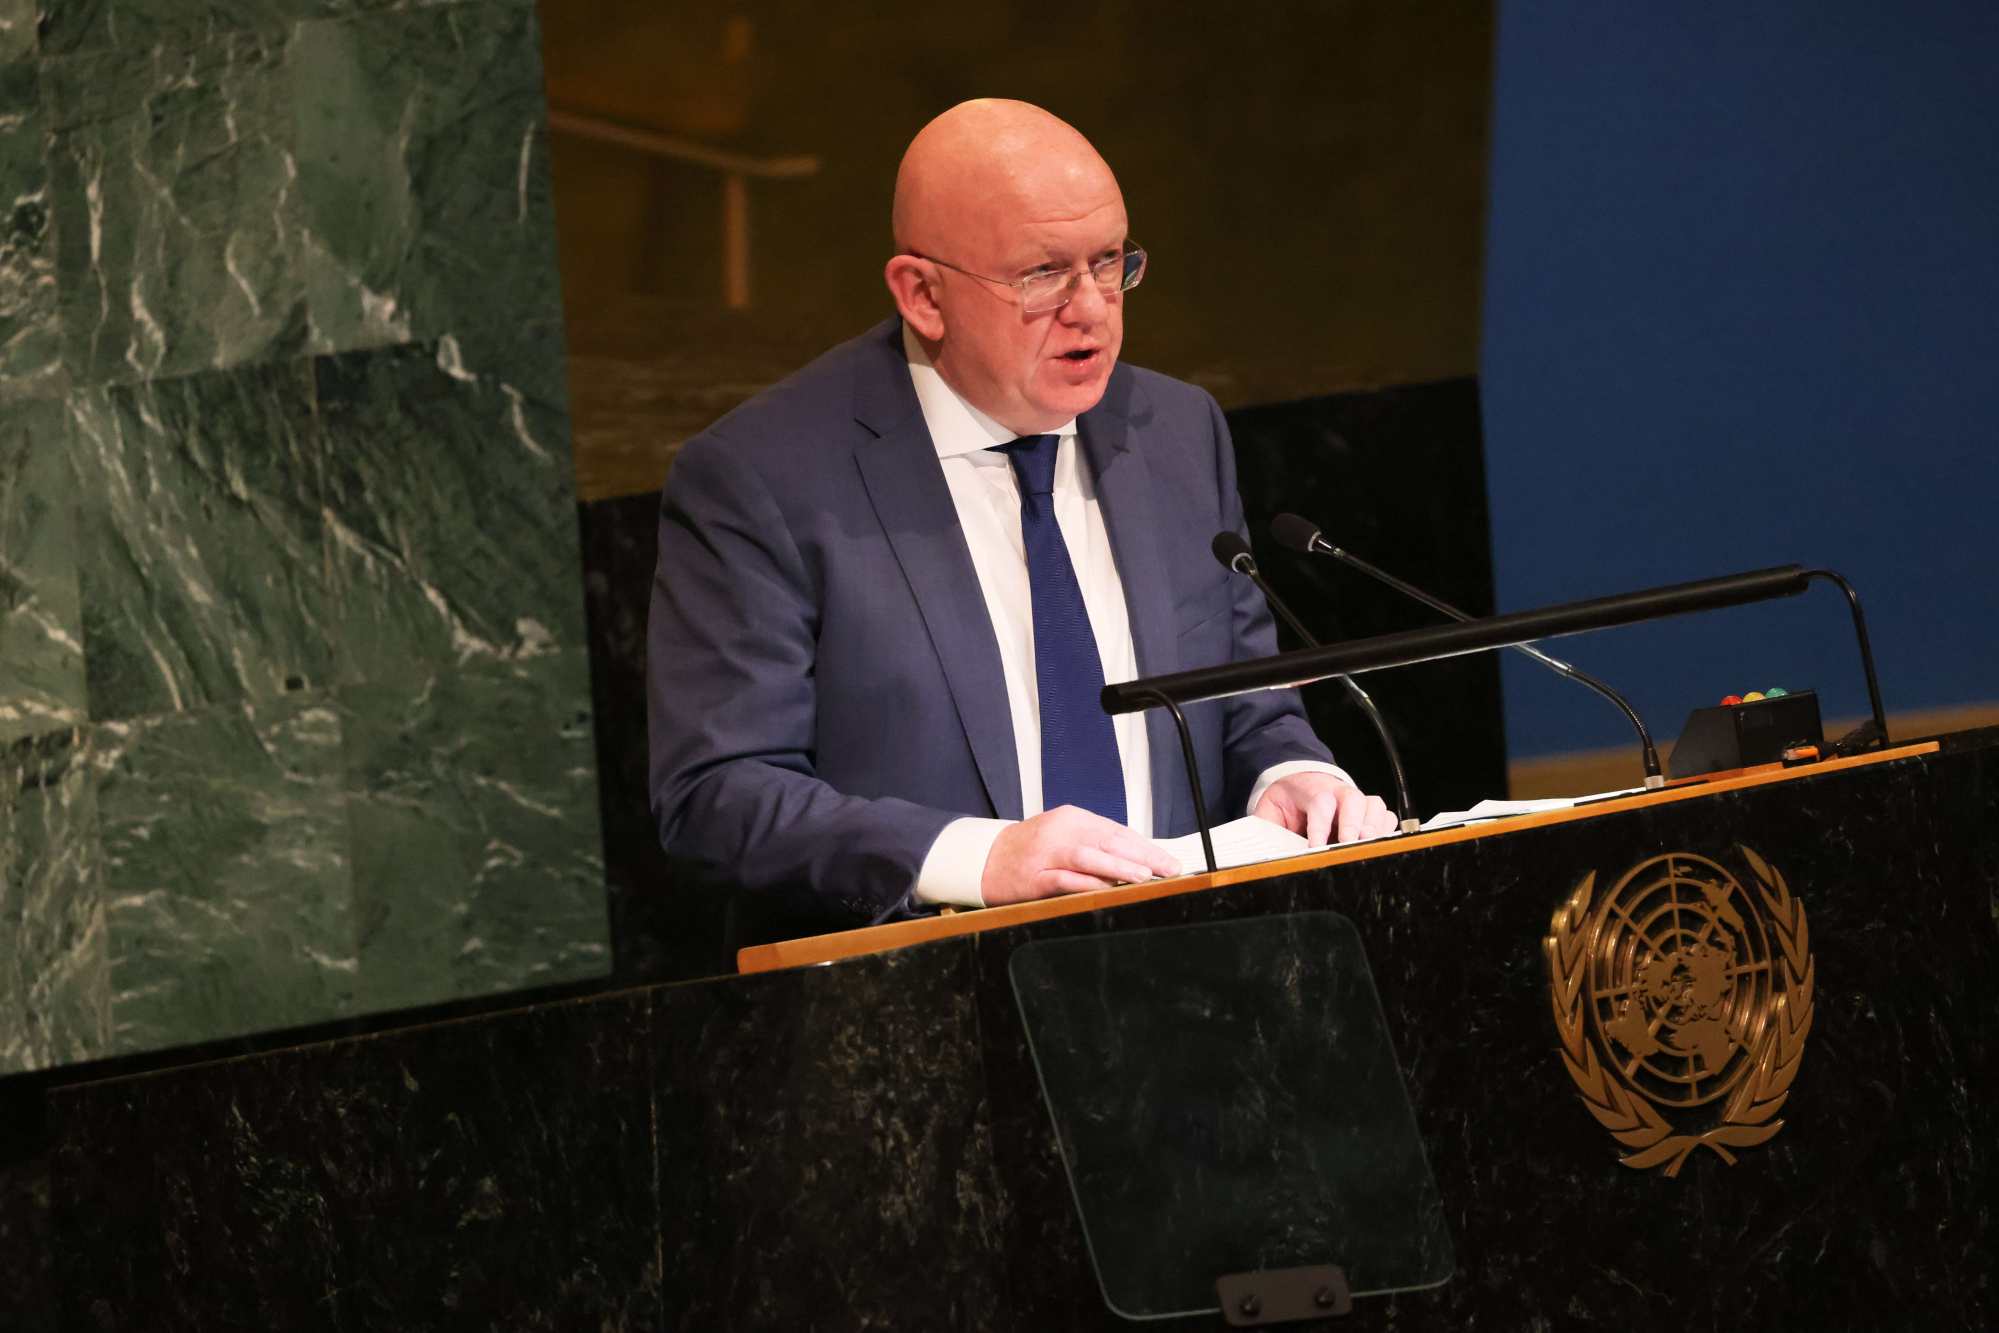 The Russian ambassador to the United Nations, Vasily Nebenzya, called Jiang “an outstanding statesman”. Photo: Getty Images/AFP